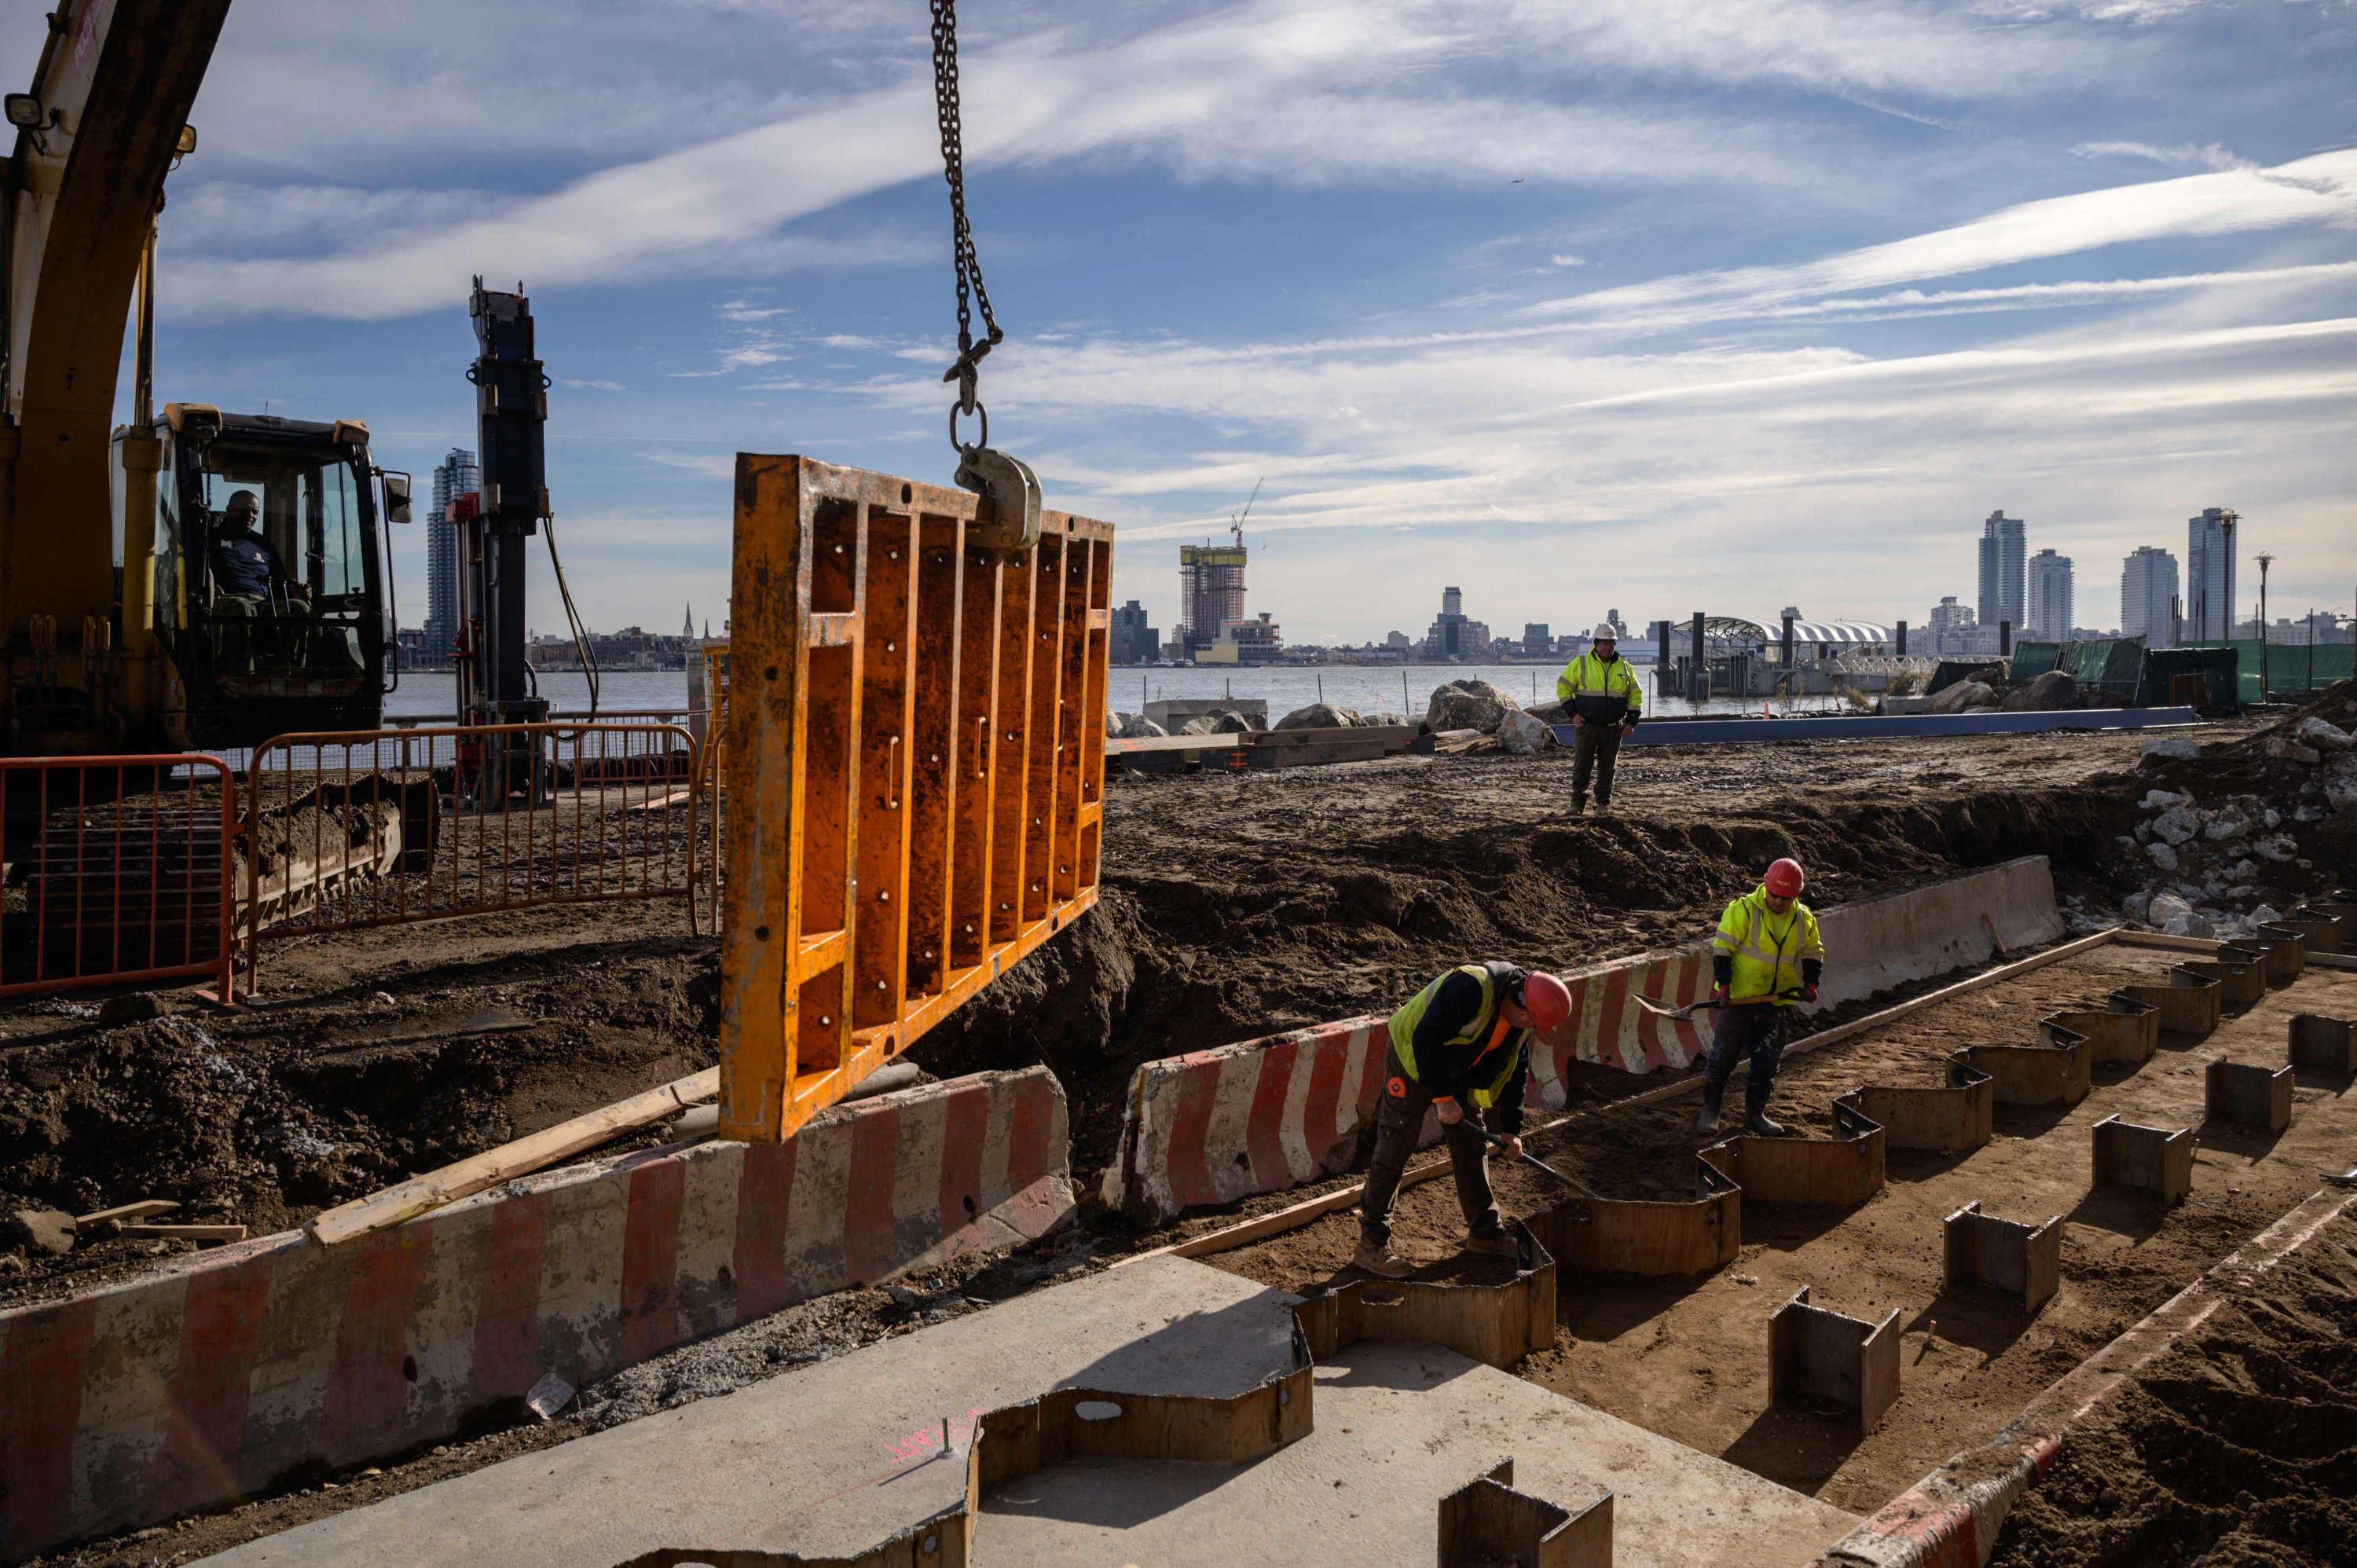 A general view shows contruction workers at the site of a flood defense project on the east side of Manhattan, New York, U.S., Dec. 11, 2021. (AFP Photo)